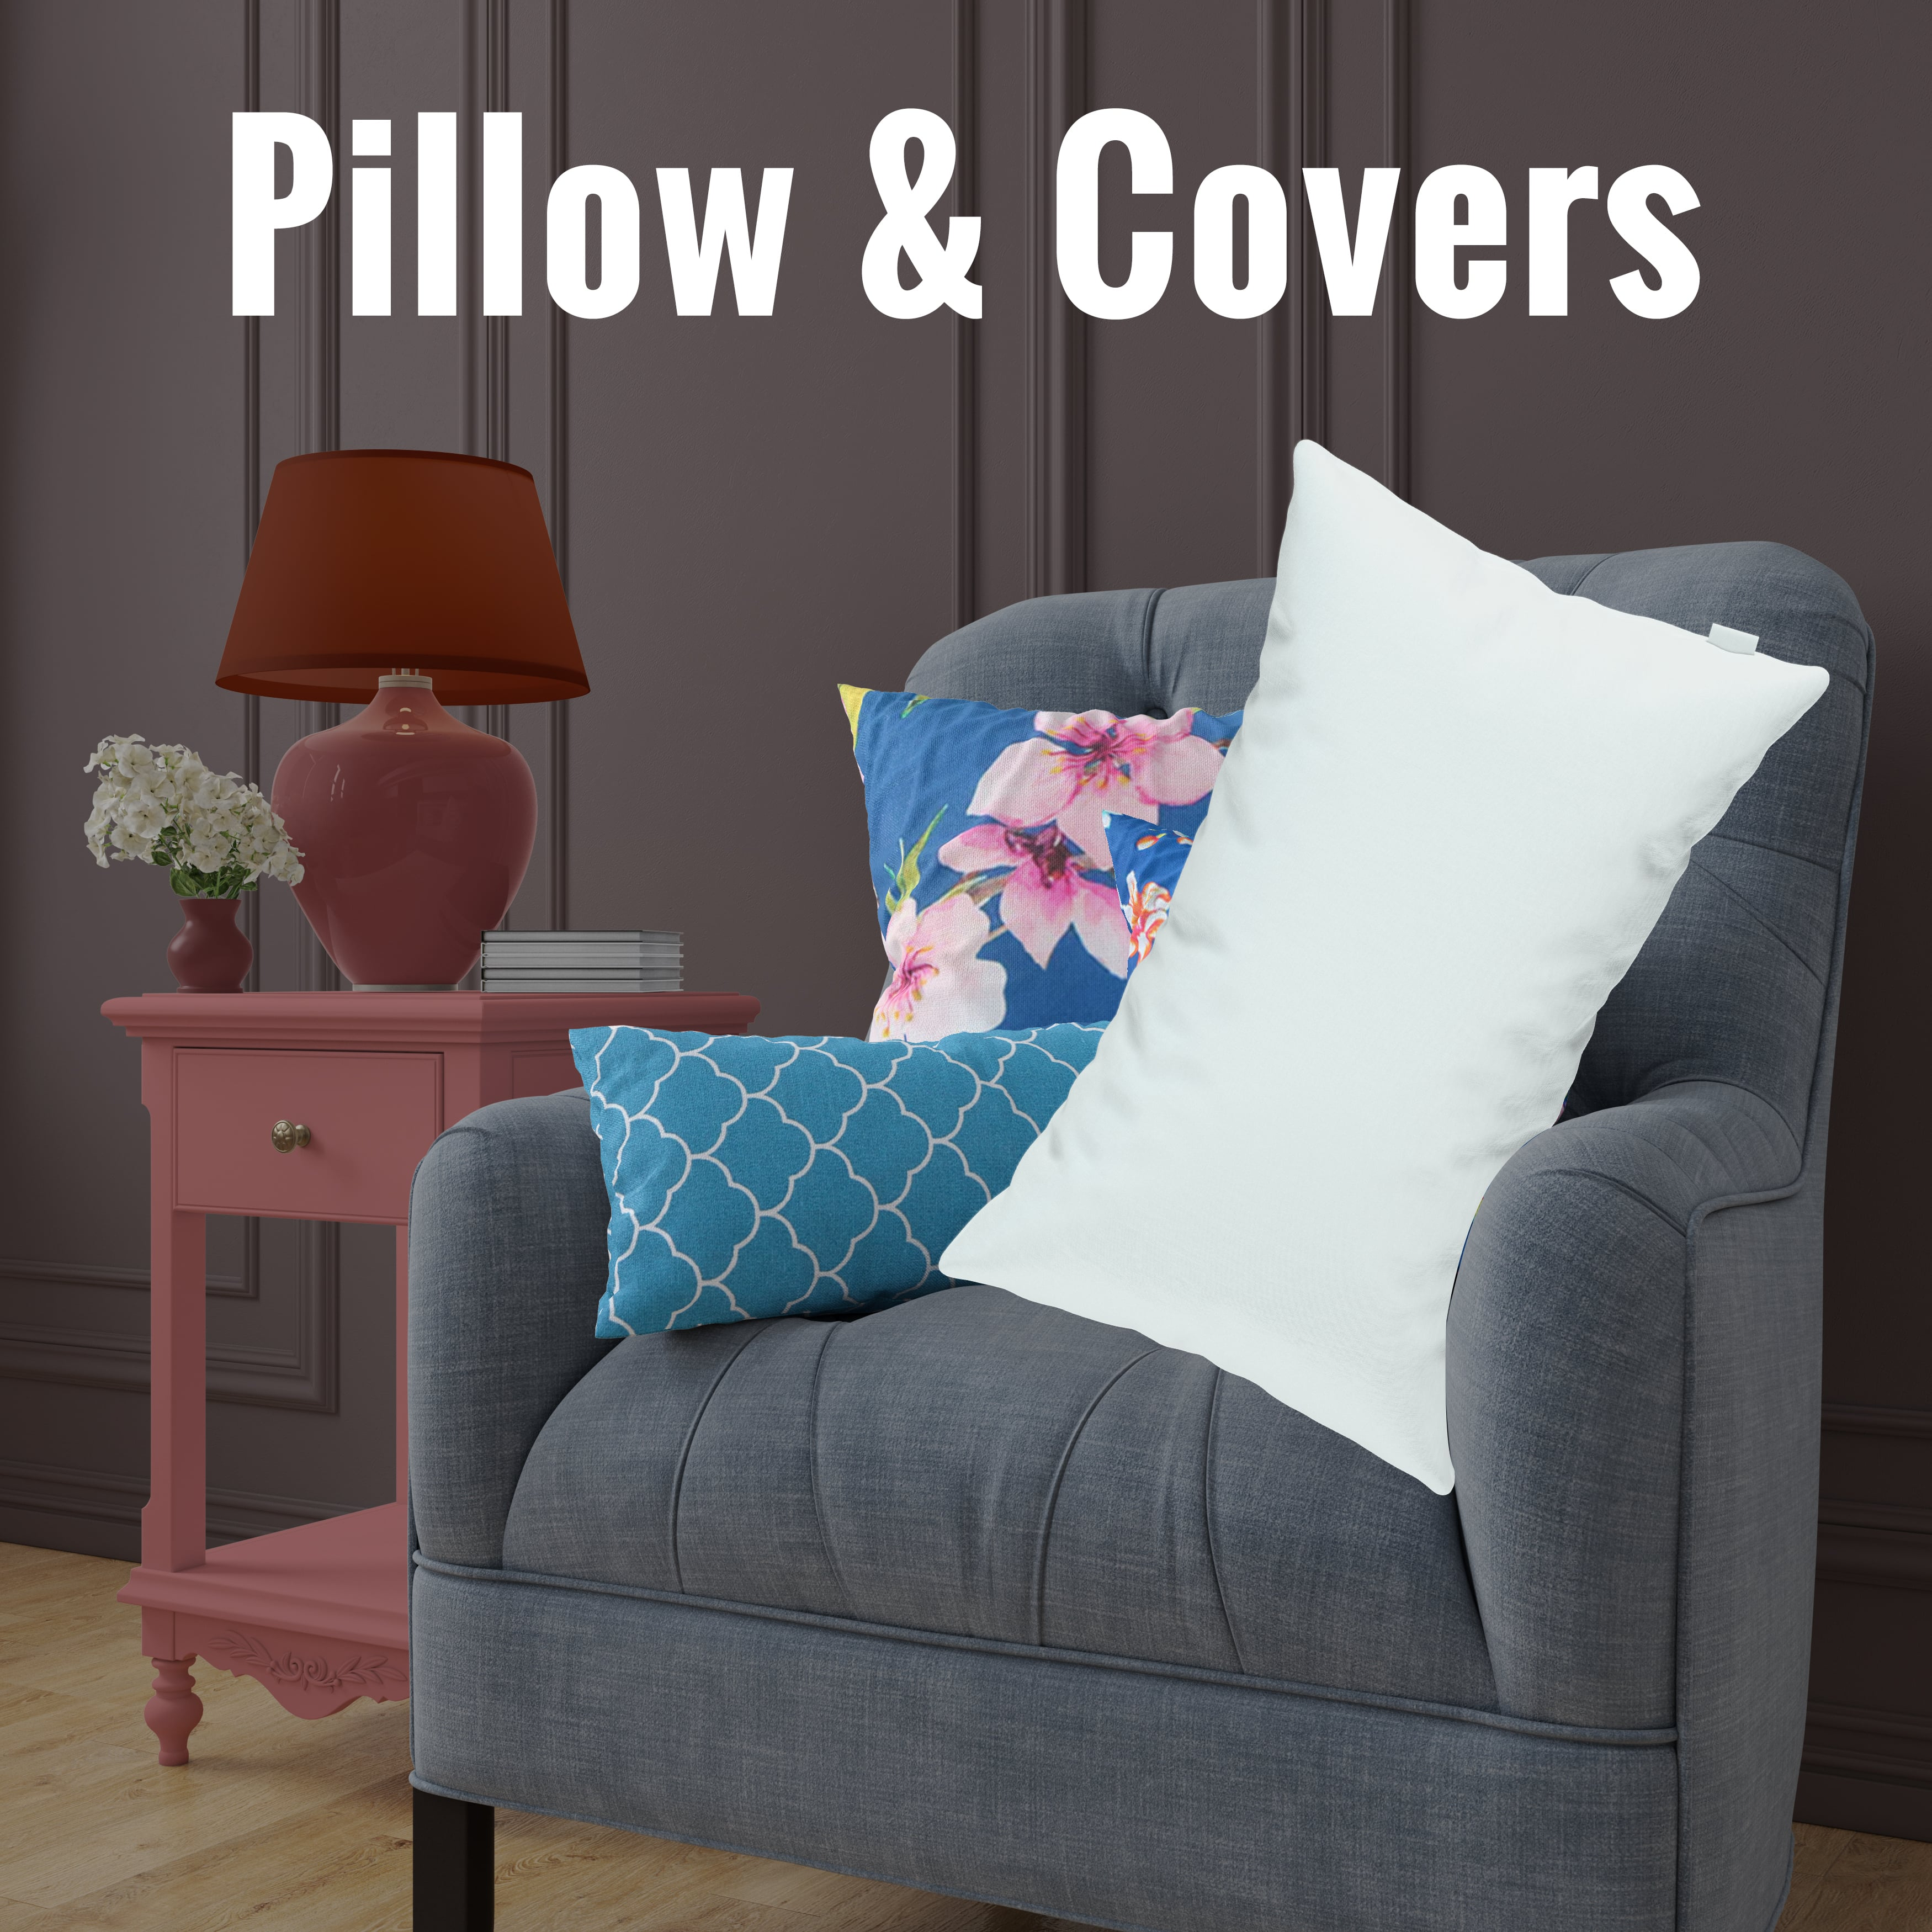 Pillow & Covers